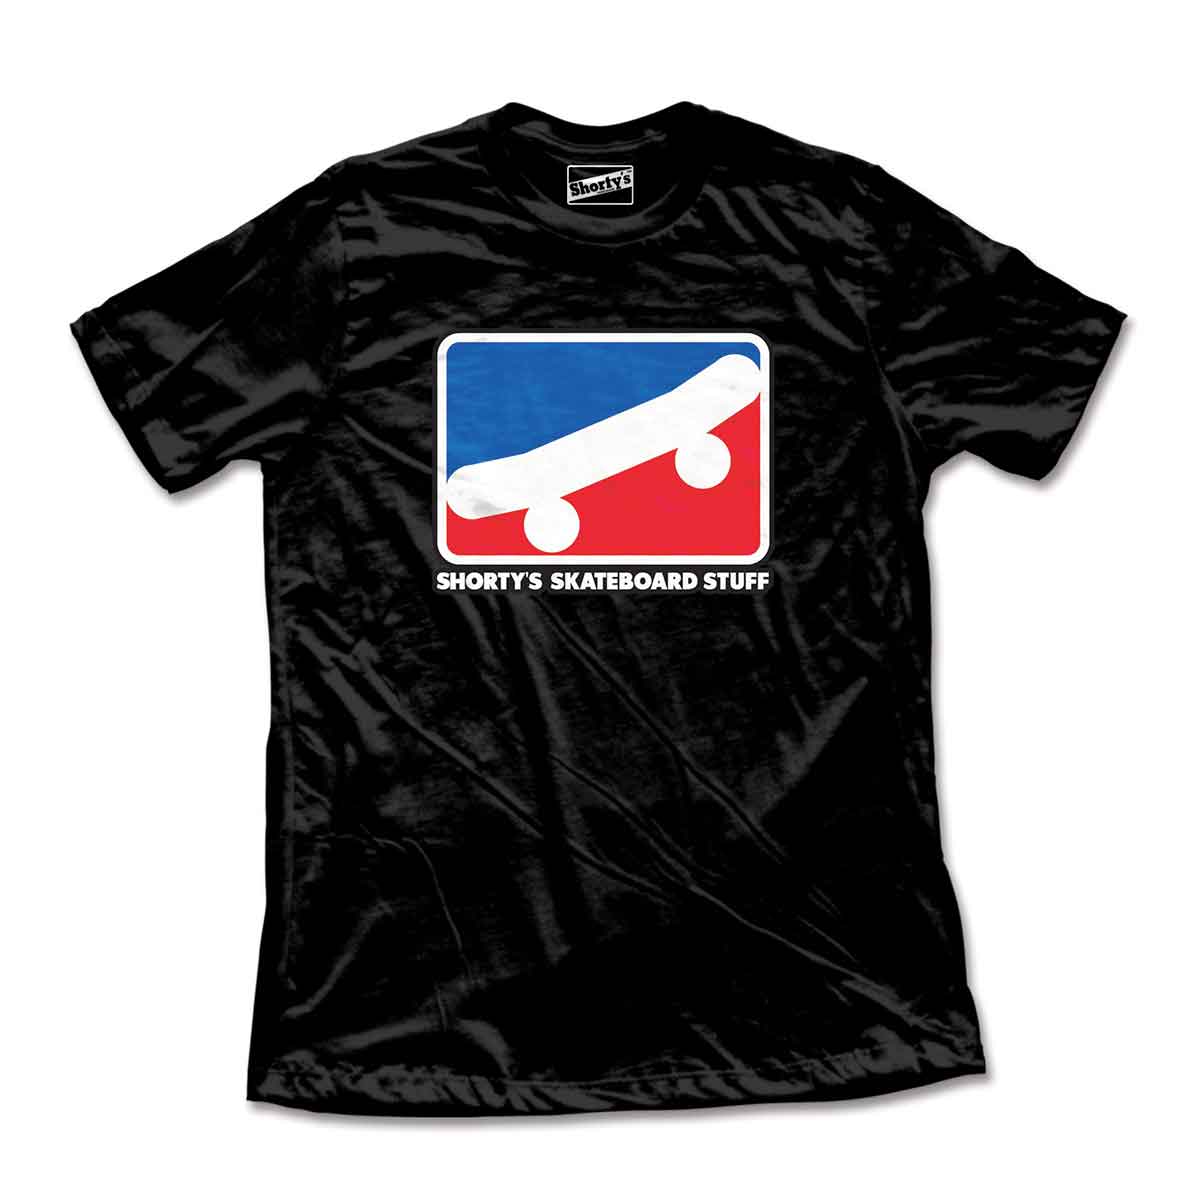 Shorty's Skate Icon T-Shirt - Black Size:Small